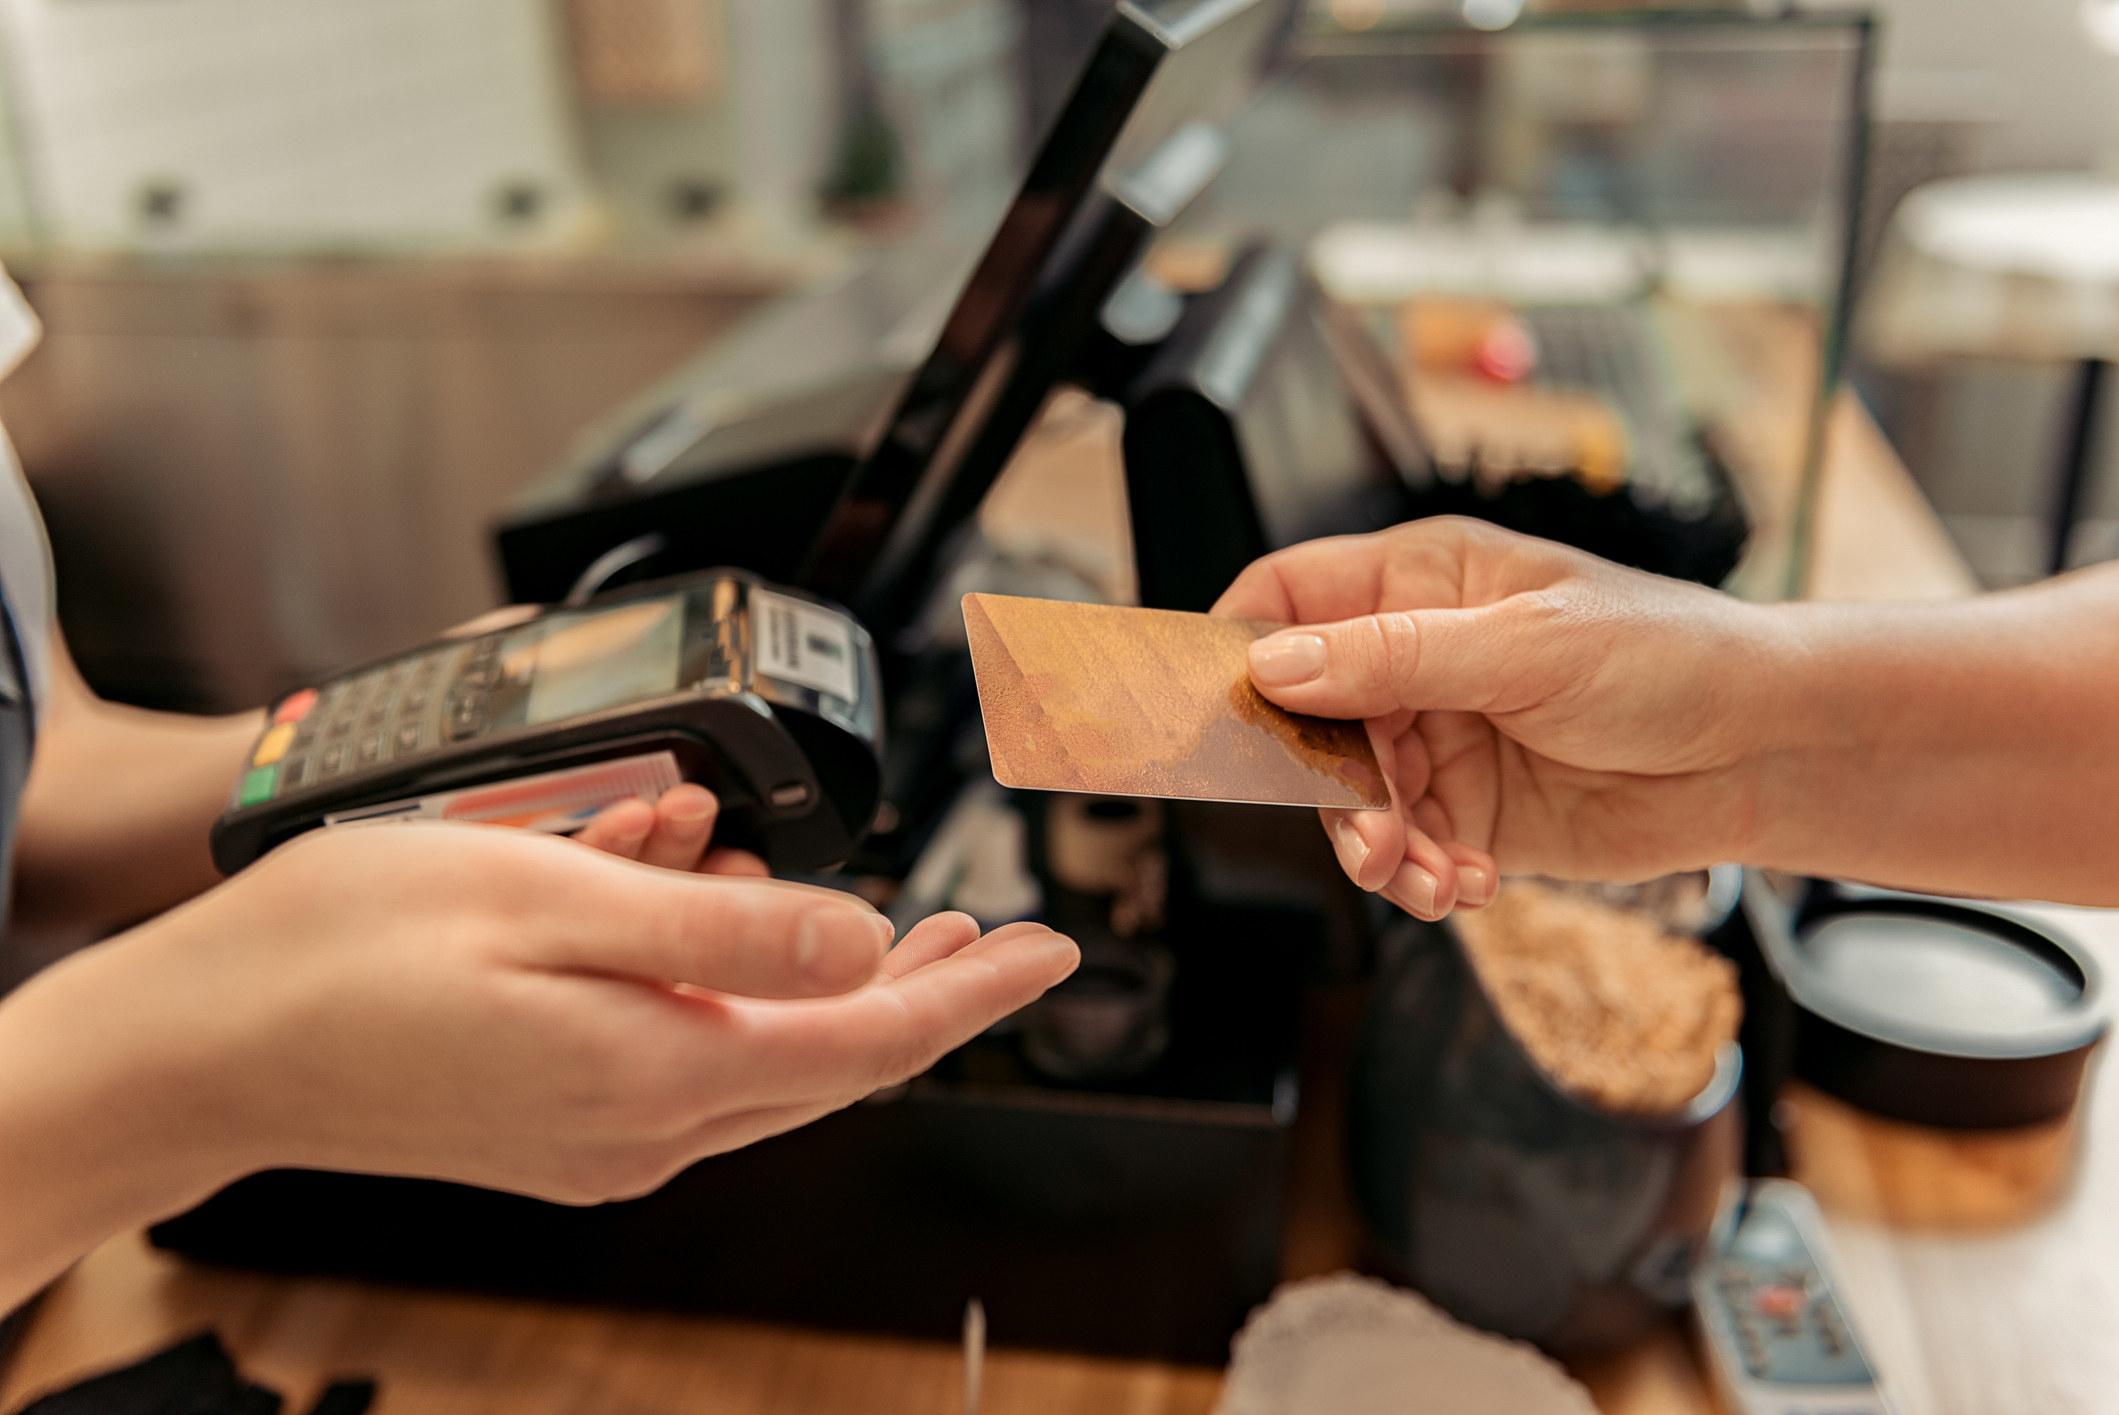 A person handing a card to a cashier